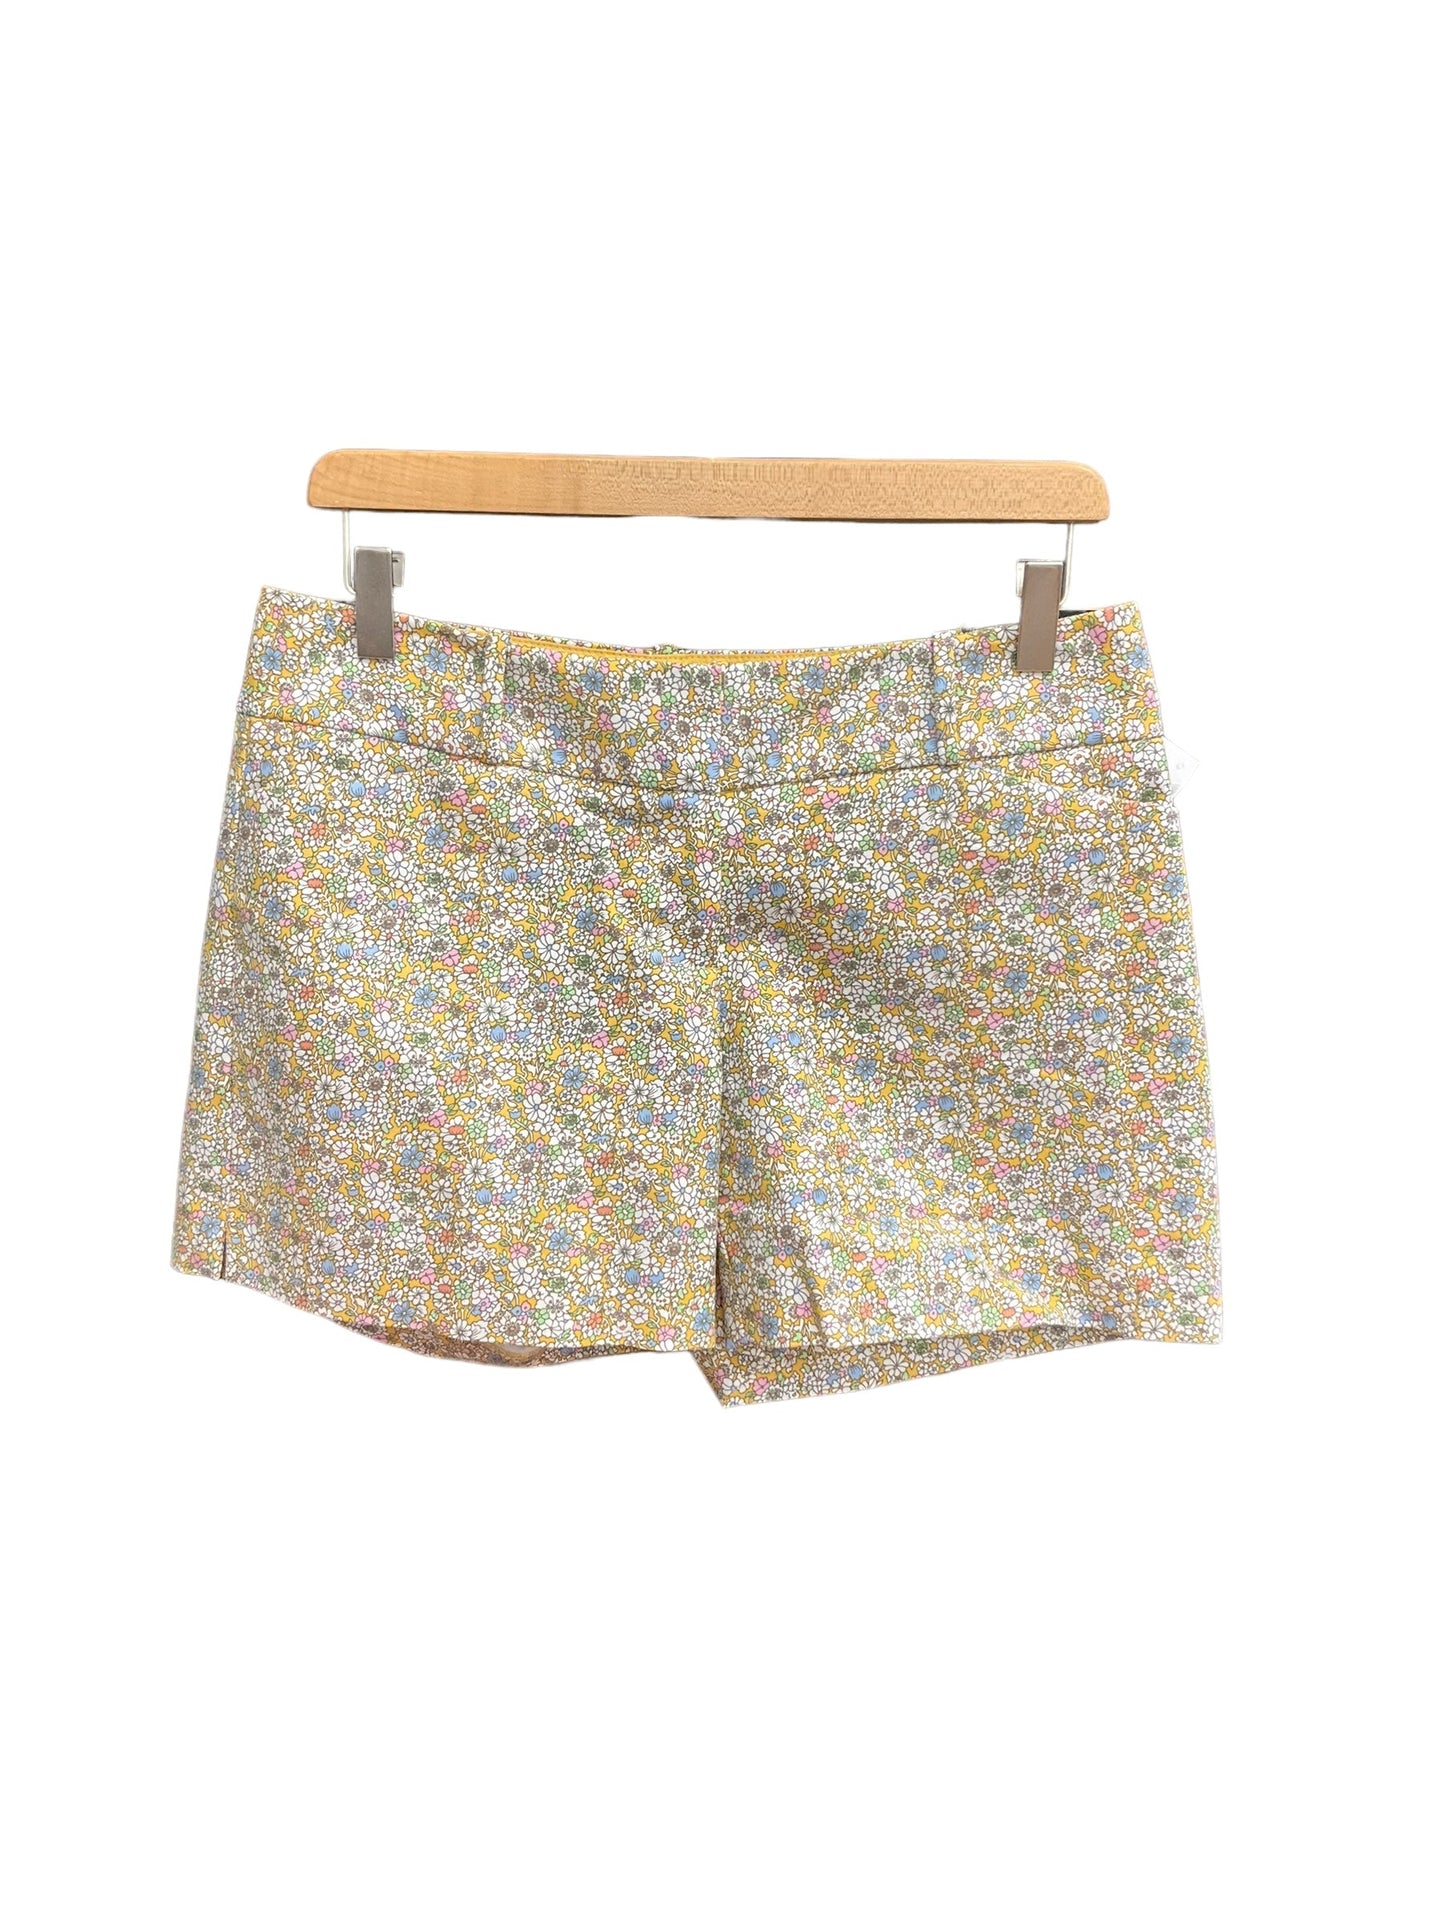 Beige Shorts Limited, Size 6